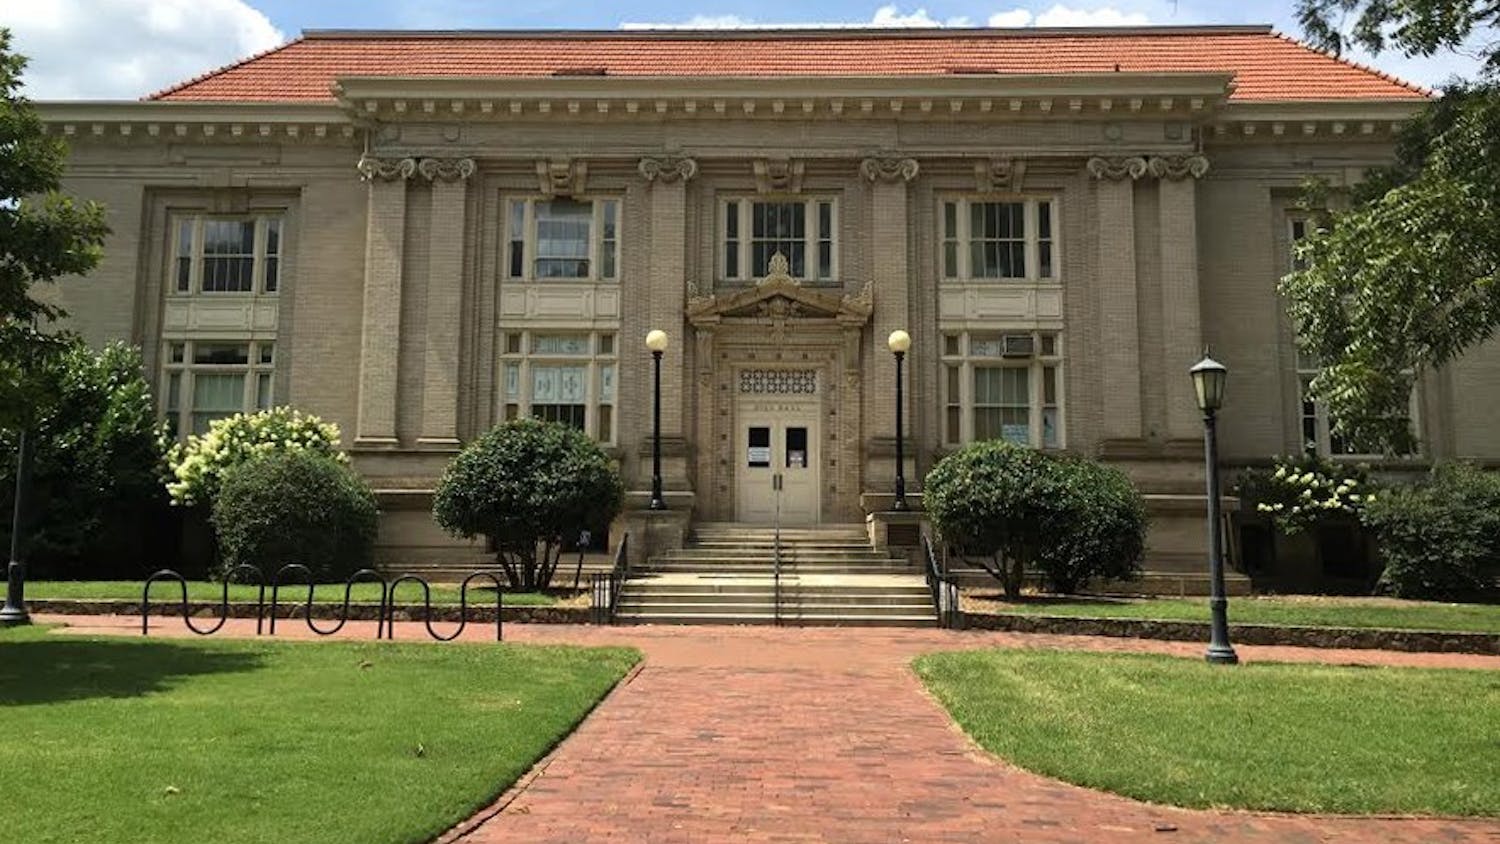 Hill Hall is currently undergoing a $15 million renovation to its auditorium. The auditorium first opened in 1907 as a library.